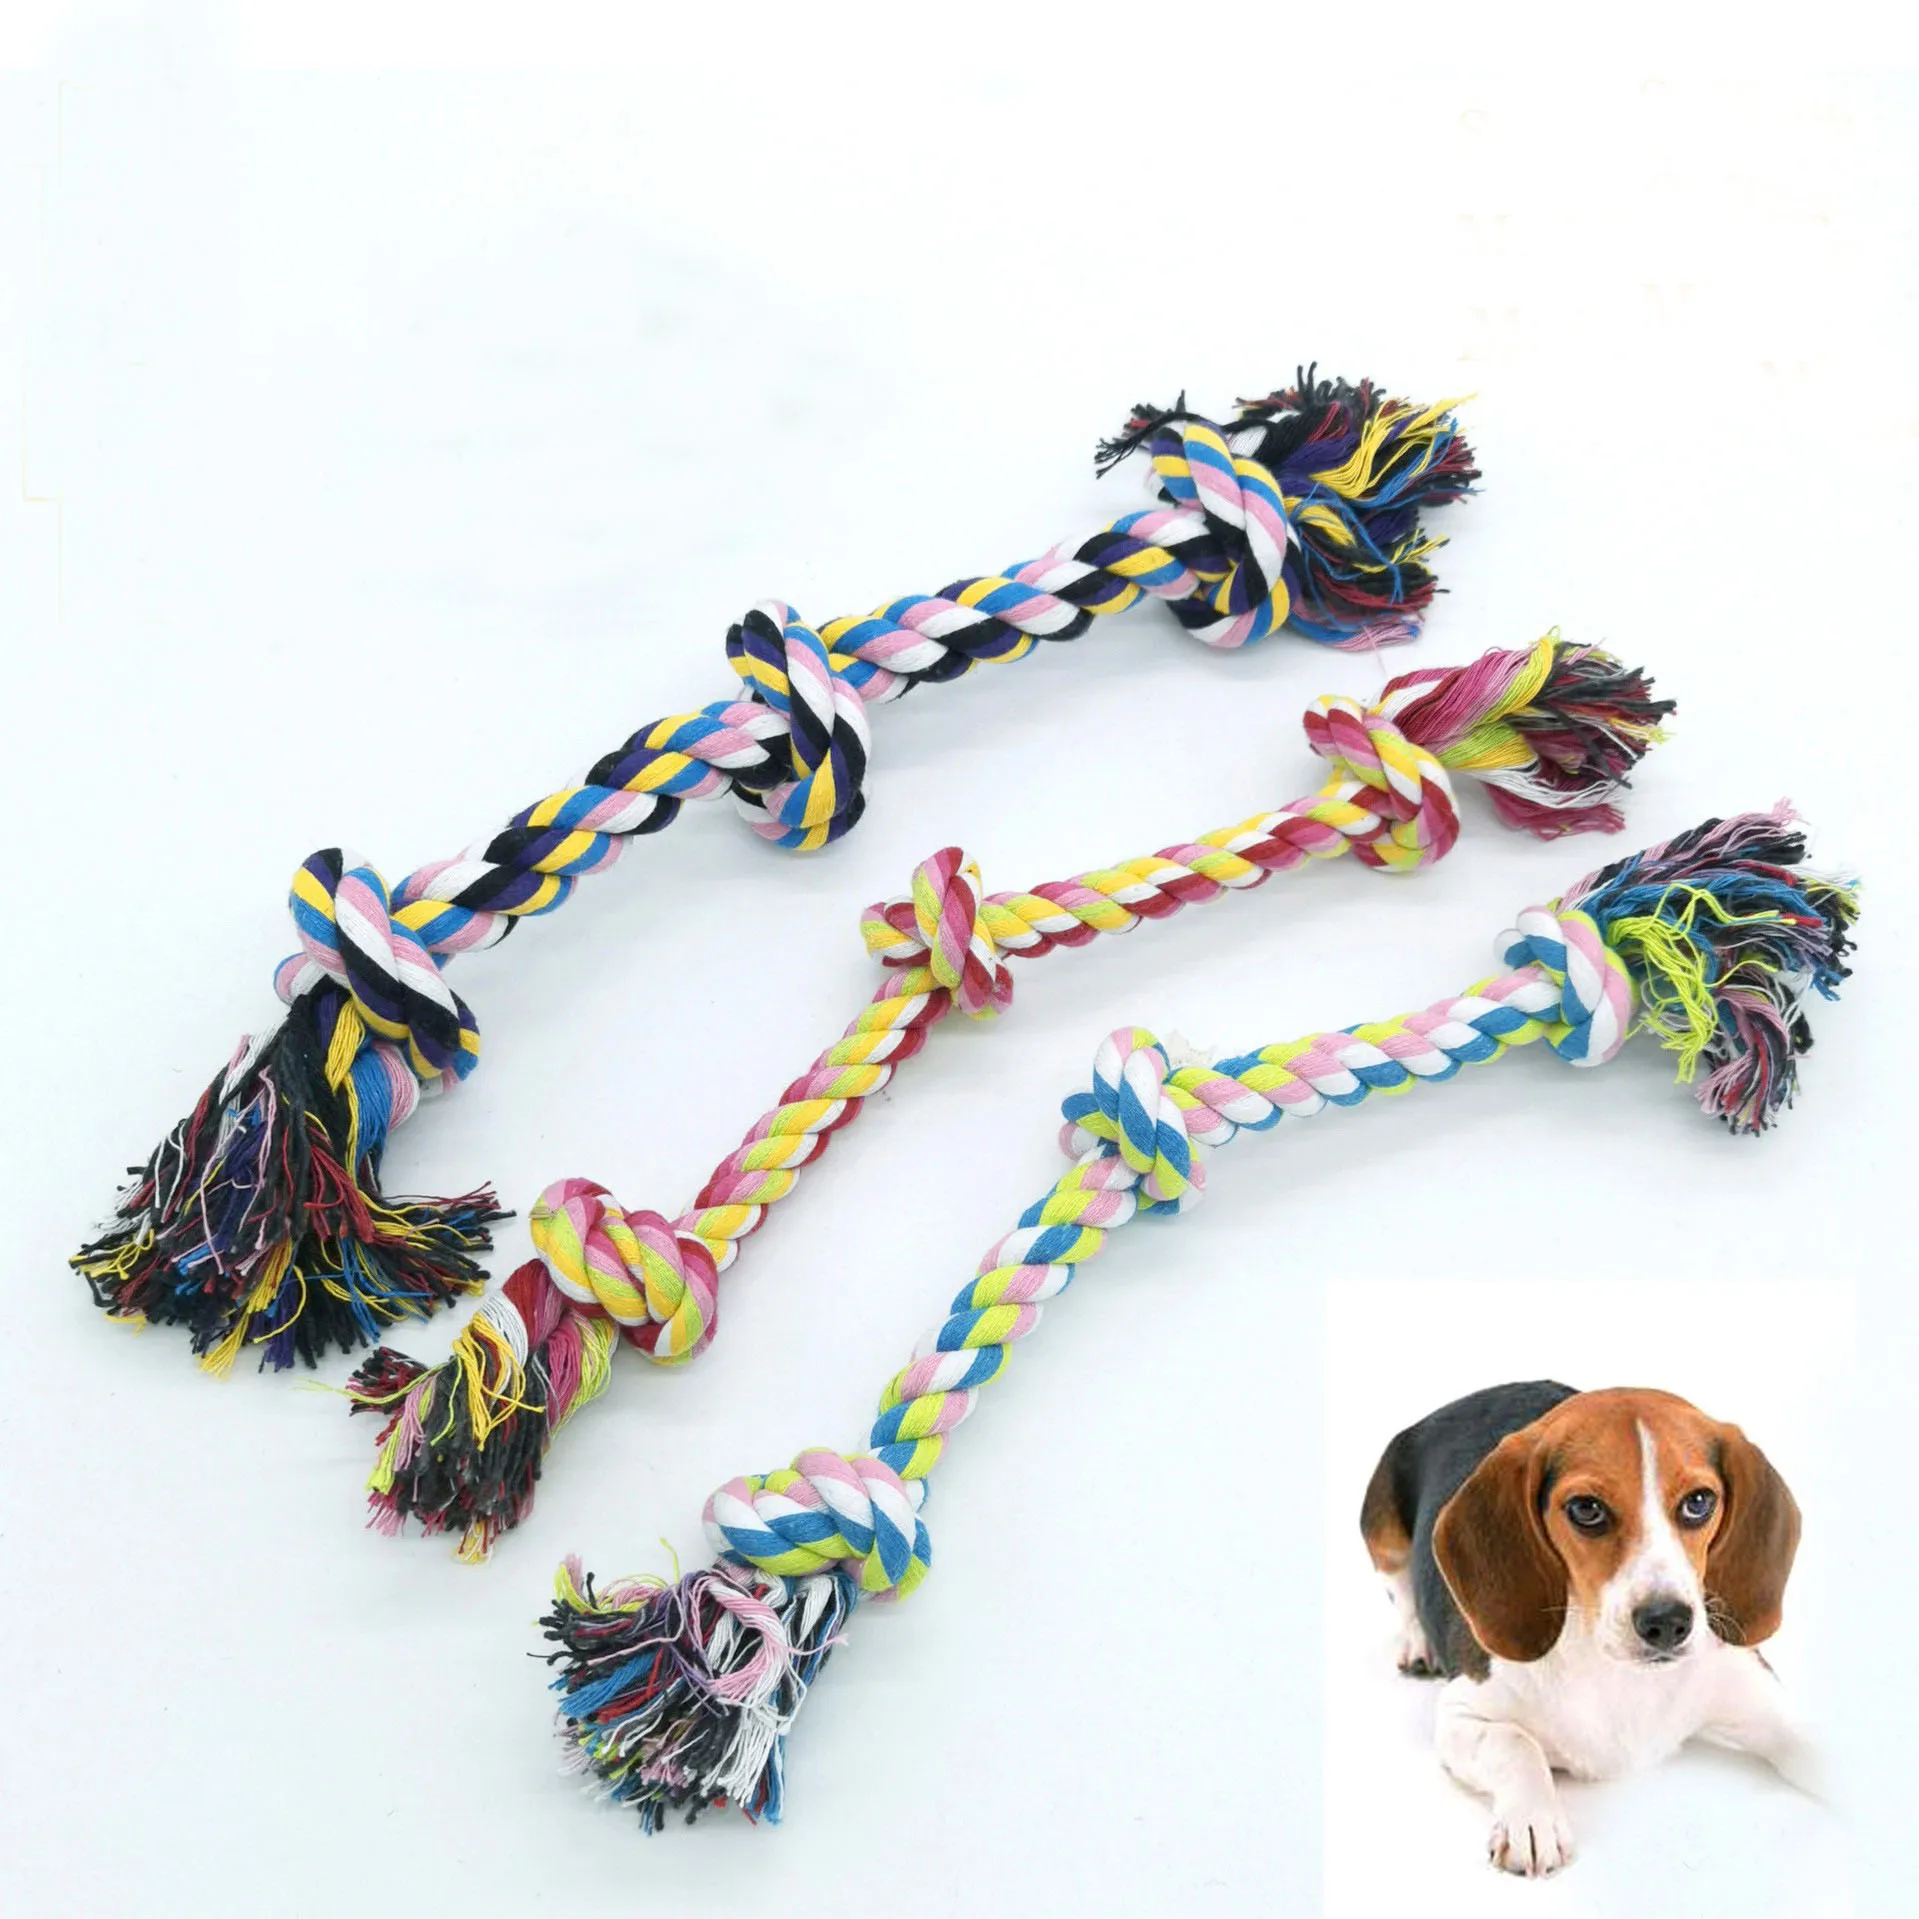 

Toys for dog Rope 30CM (Random Color ) pet supplies Pet Dog Puppy Cotton Chew Knot Puppy Relieving Stuffy Cleaning Teeth